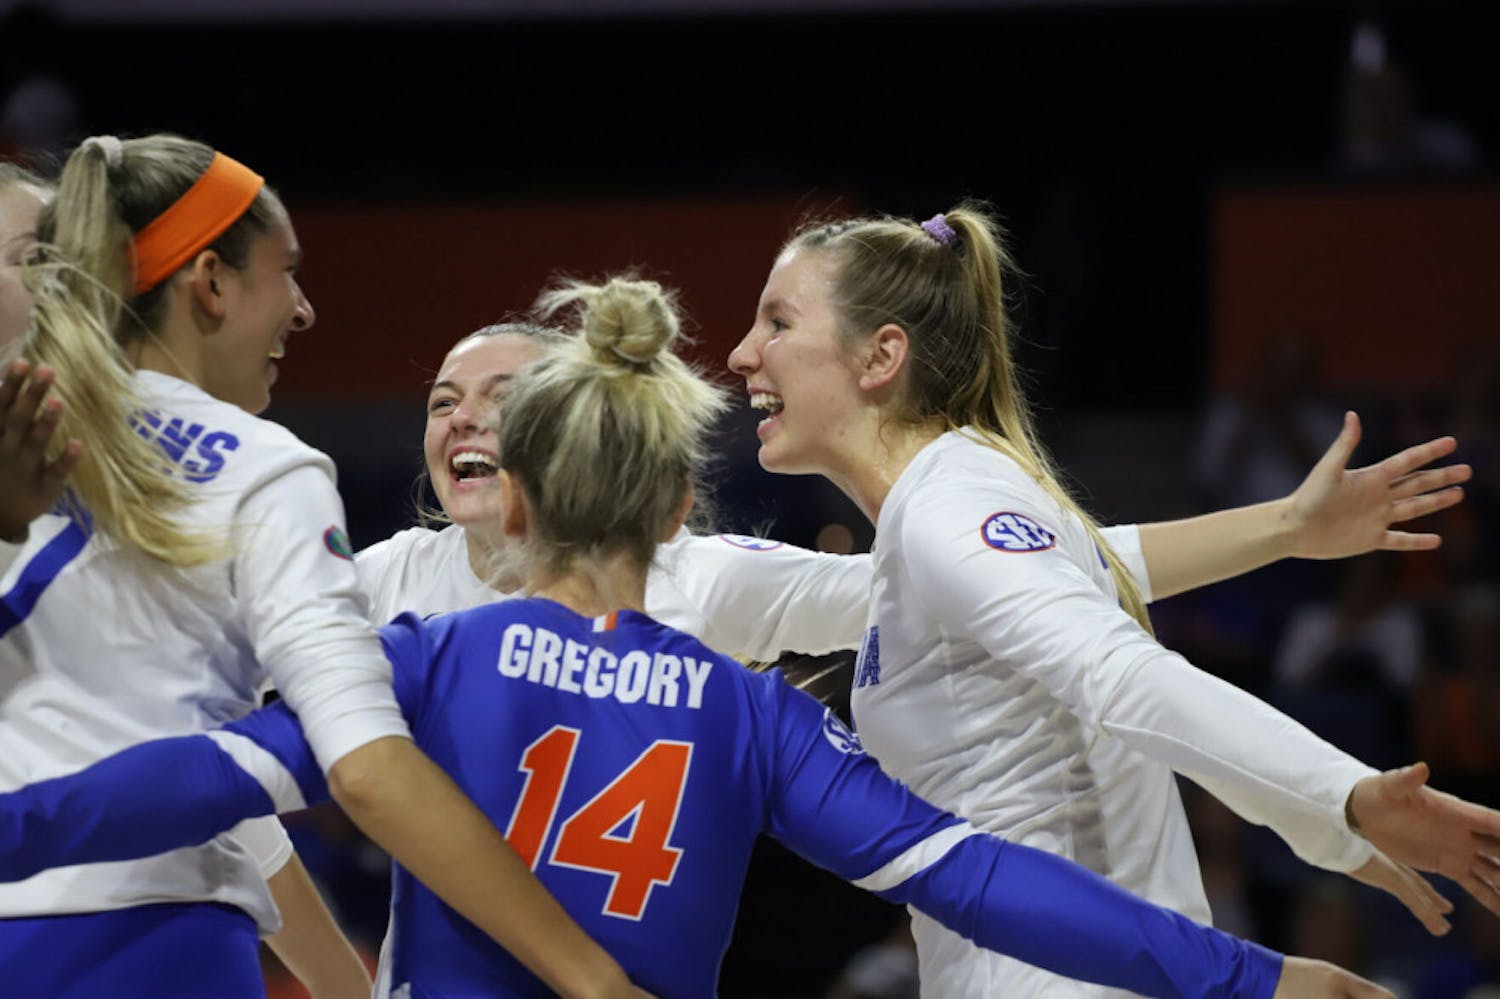 The Gators celebrate a successful play at home against Texas A&amp;M in 2019.